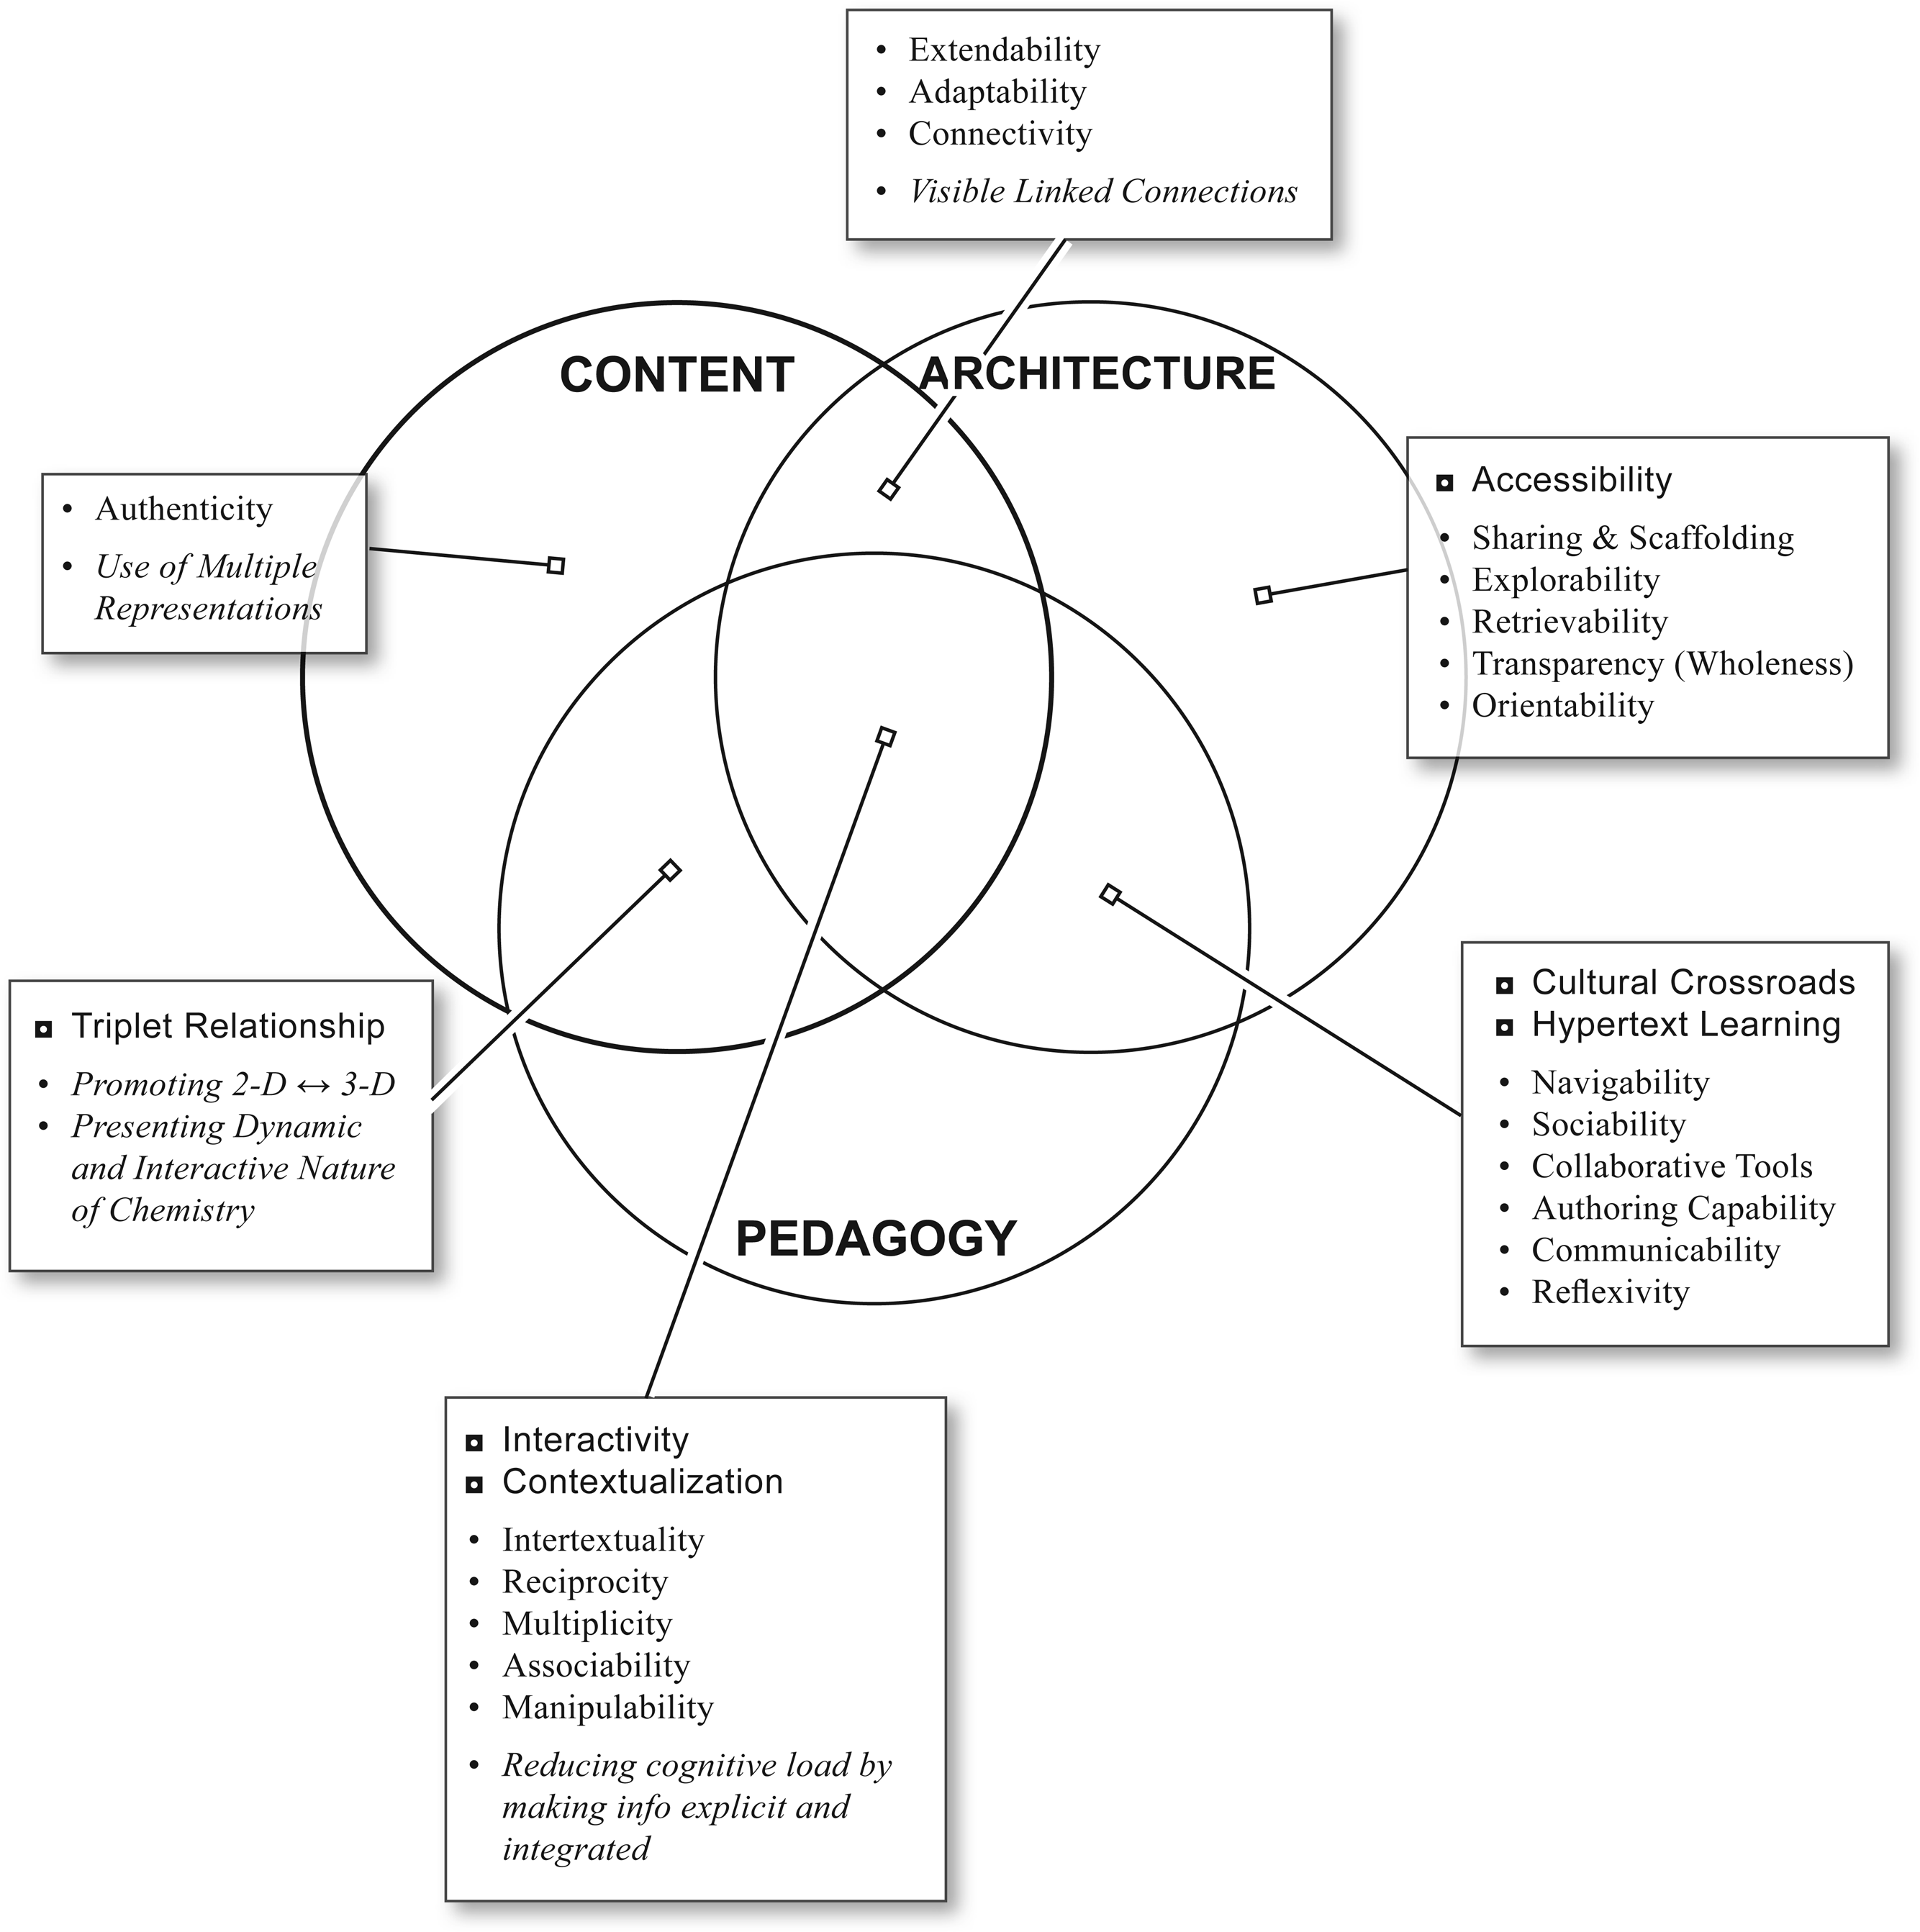 Image from Shorb 2011 of a Venn diagram of Content Architecture and Pedagogy topics. 